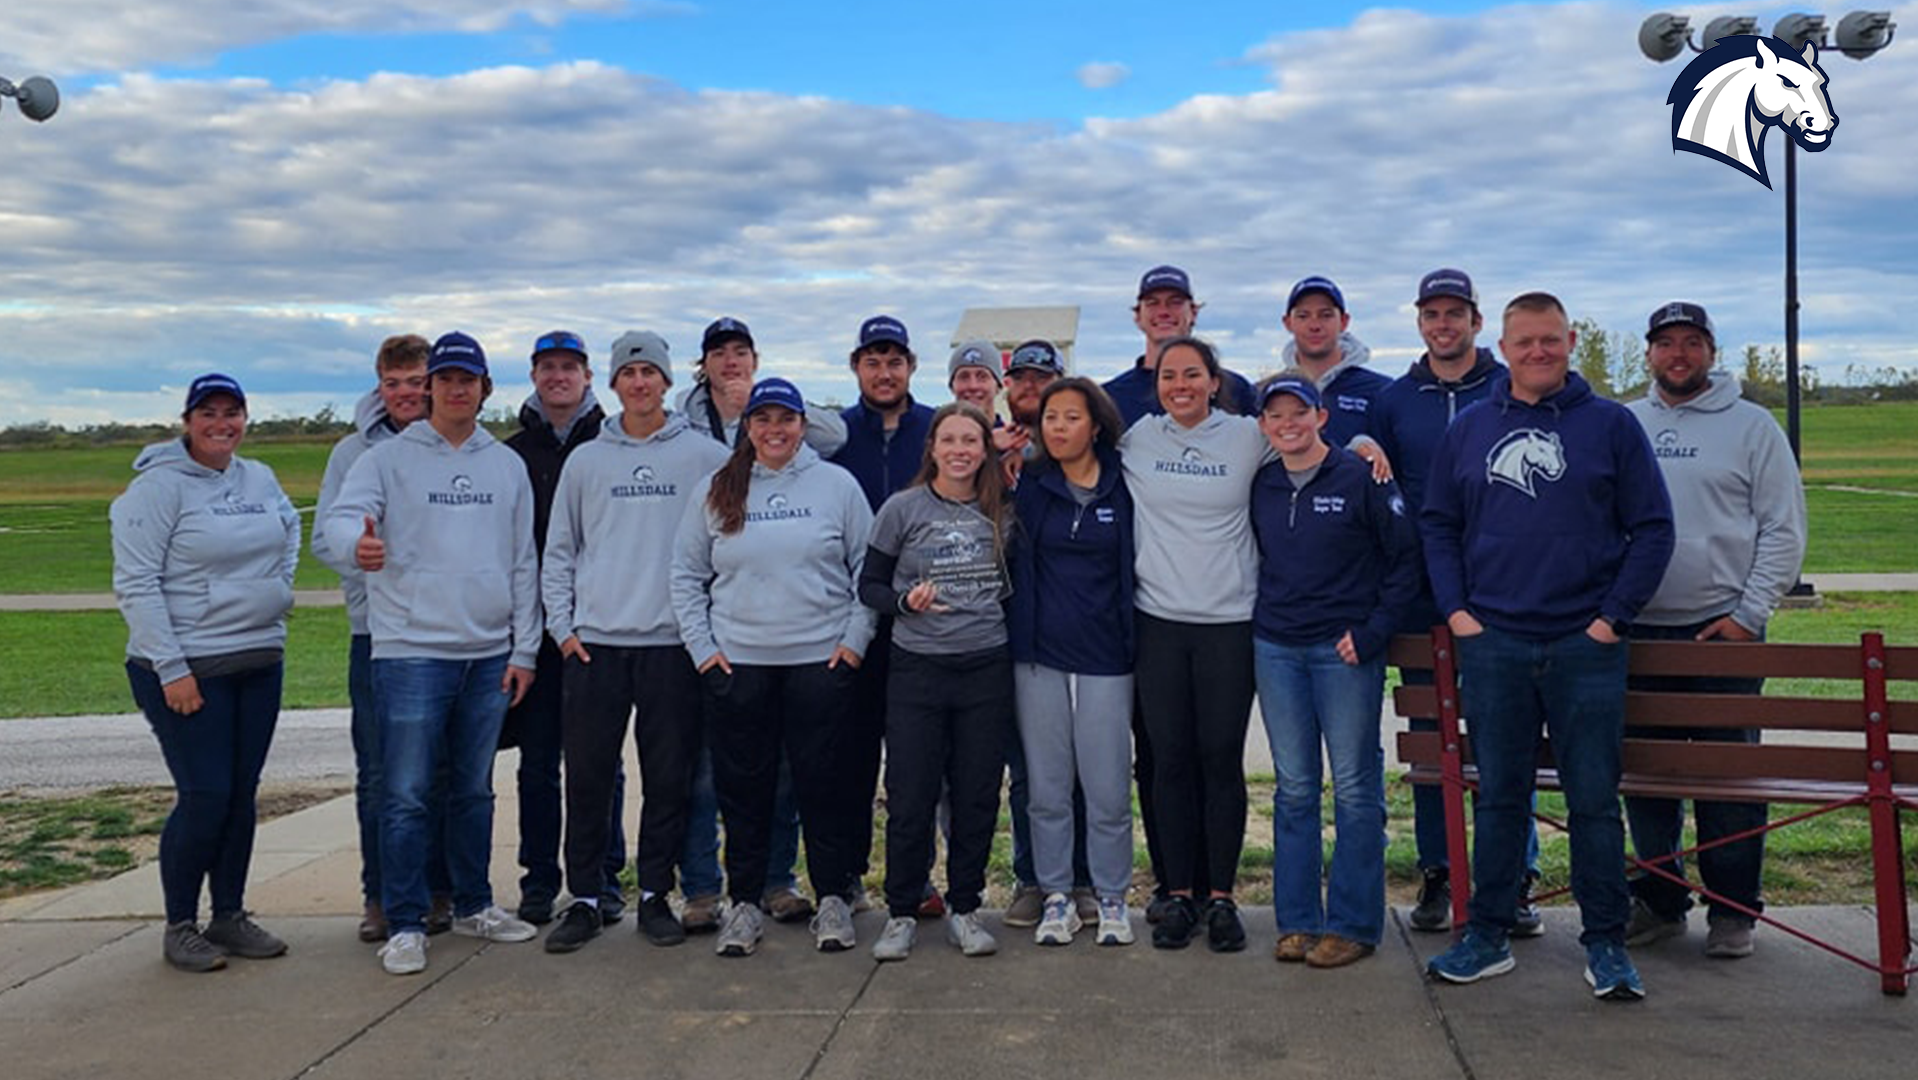 Hillsdale bests national power Lindenwood for second conference championship win